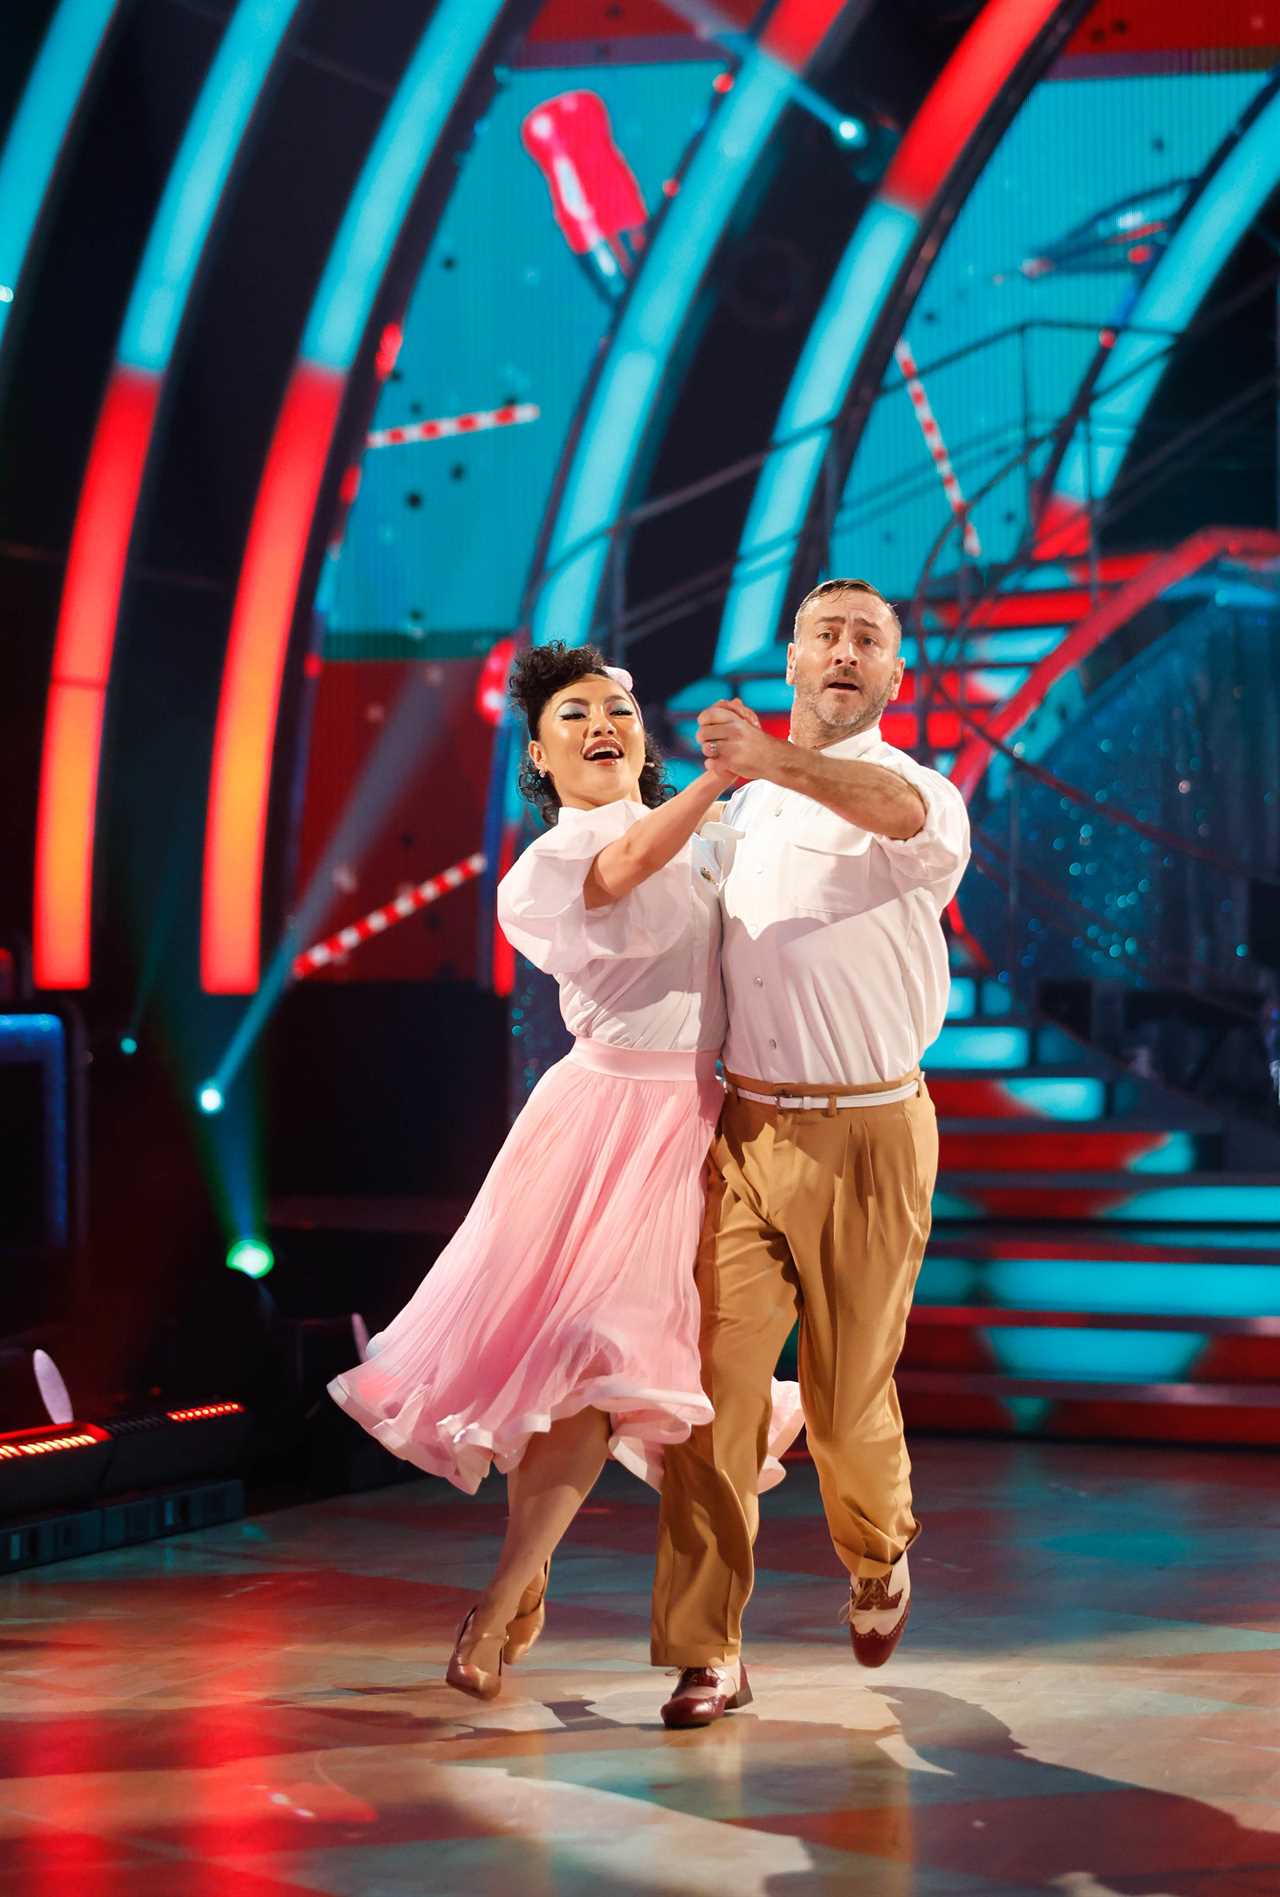 Will Mellor fights back tears as he reveals heartbreaking reason he quit Strictly rehearsals on Monday